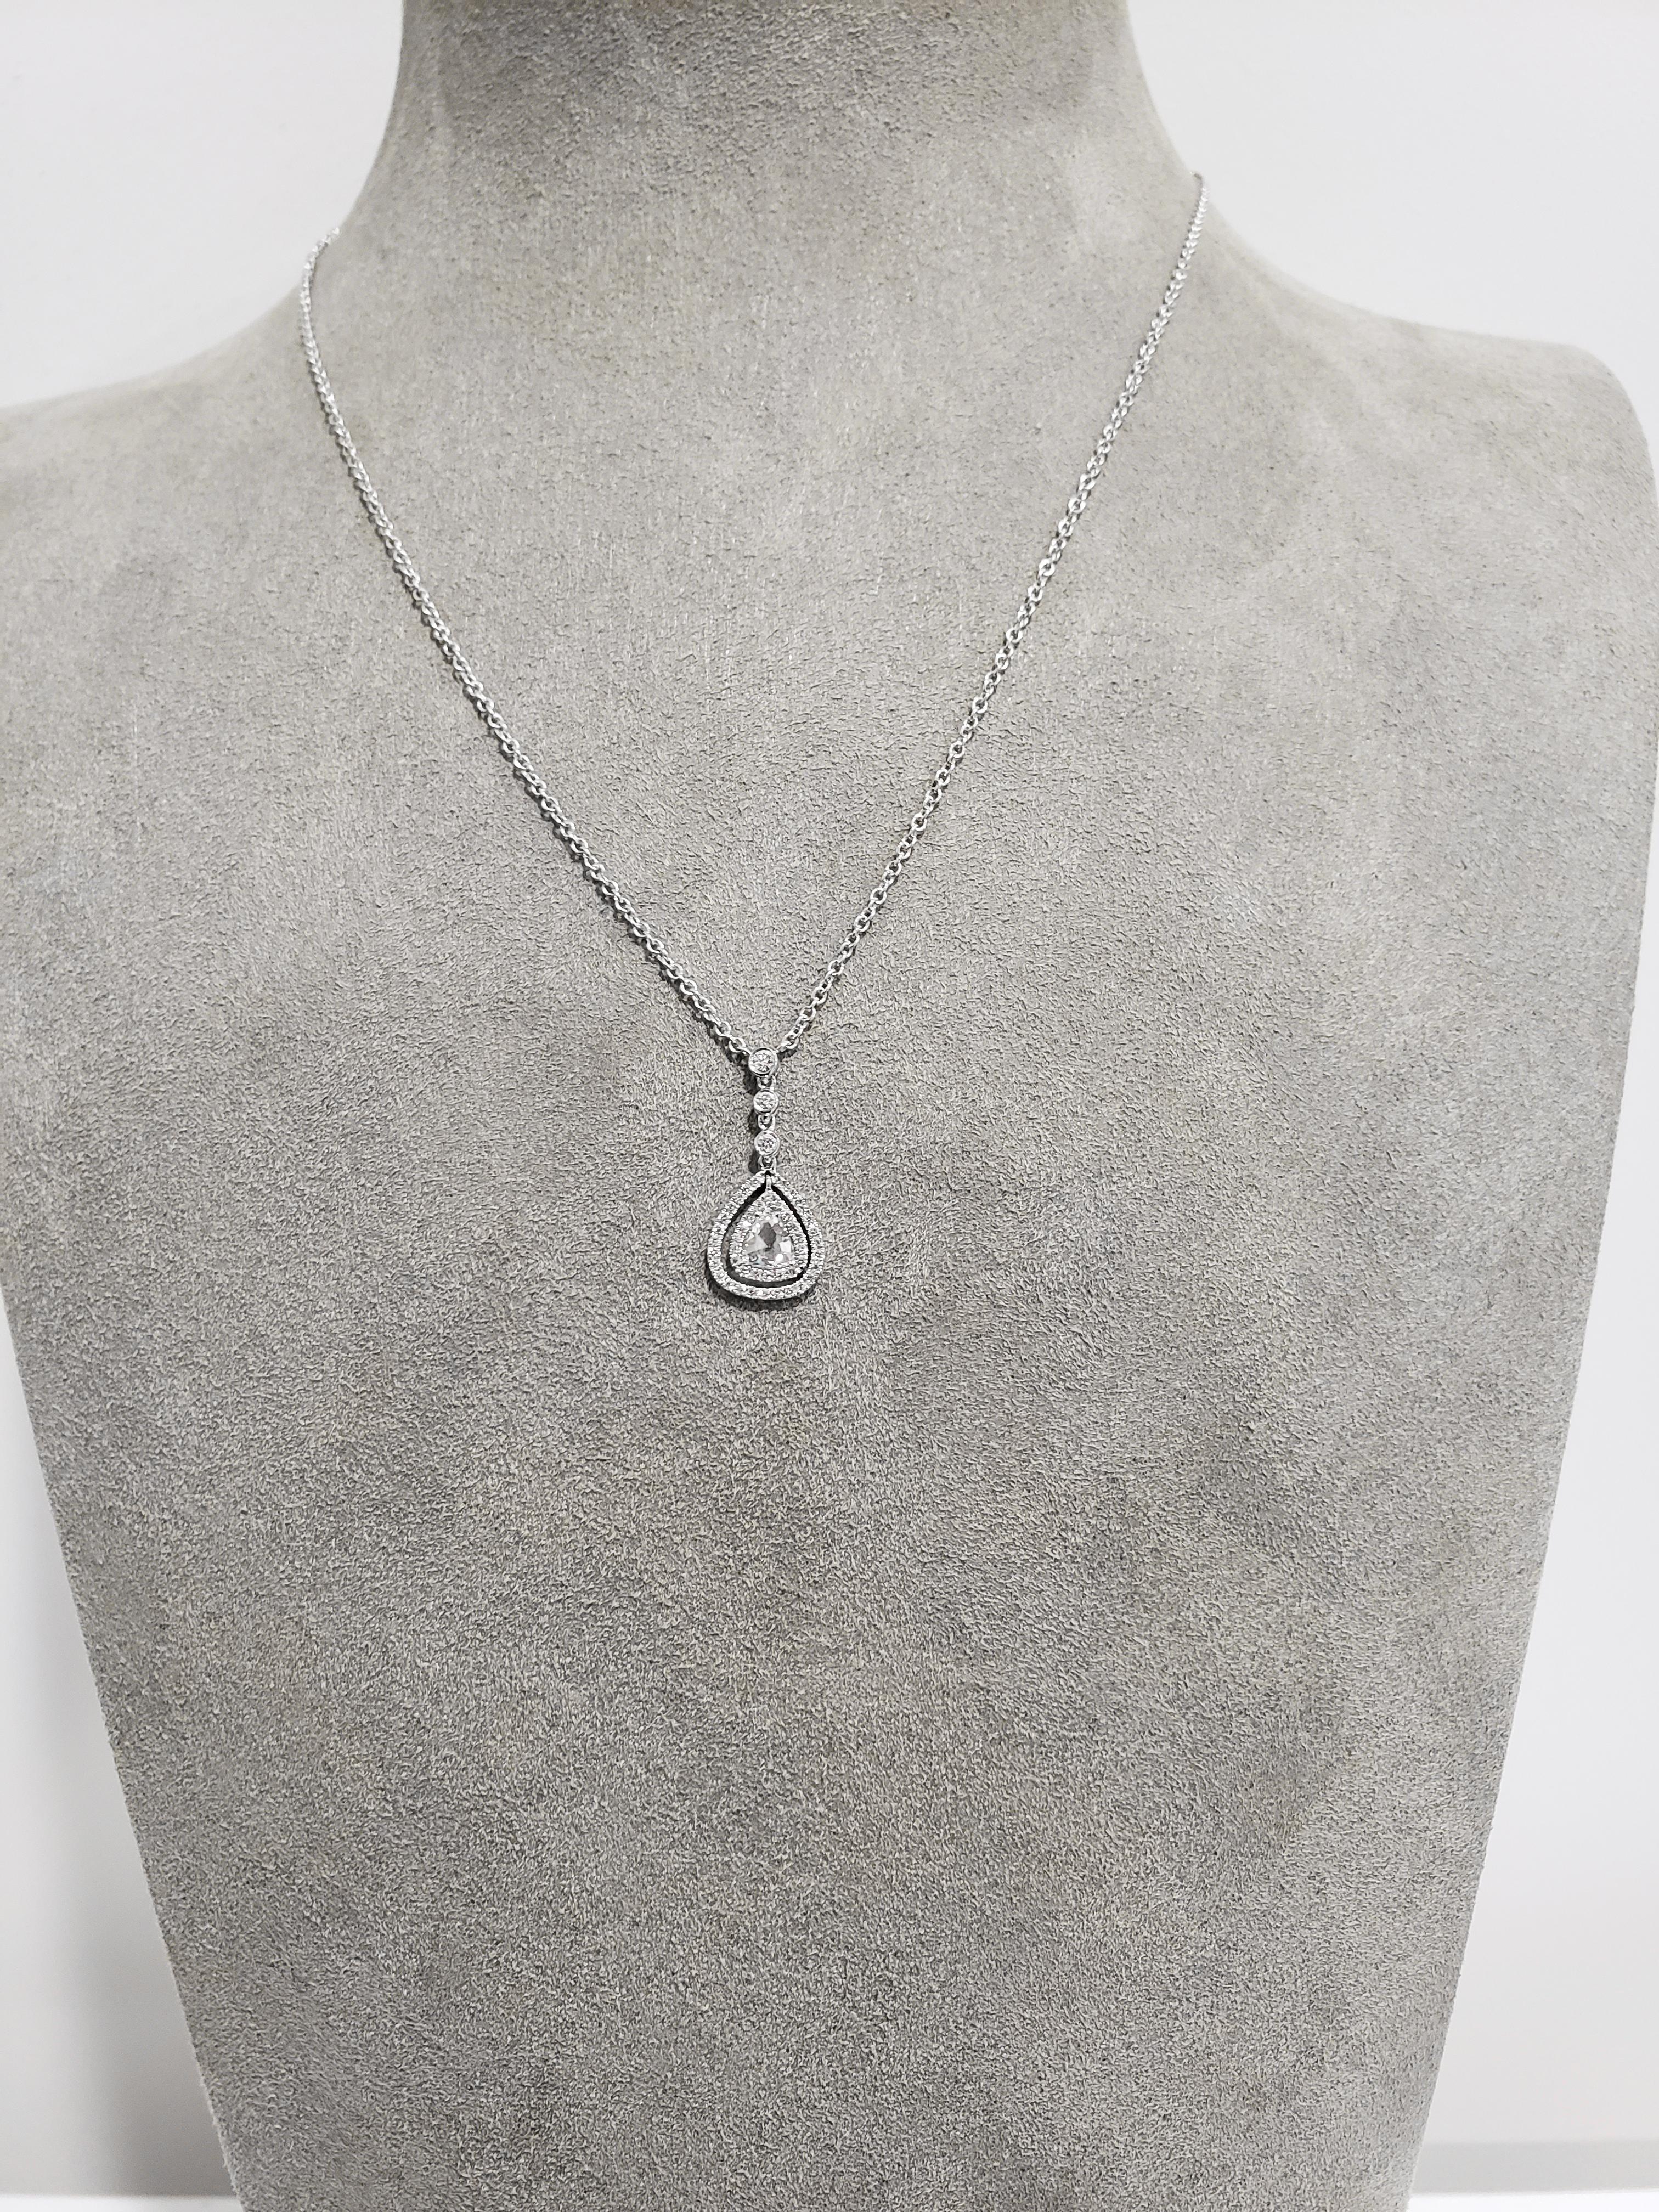 Showcasing a single 0.40 carat rose cut diamond surrounded by two rows of round diamonds in an open-work design. Suspended on 3 round diamonds, bezel set in 18 karat white gold. Attached to a 14 karat white gold chain that is adjustable to 16 and 18